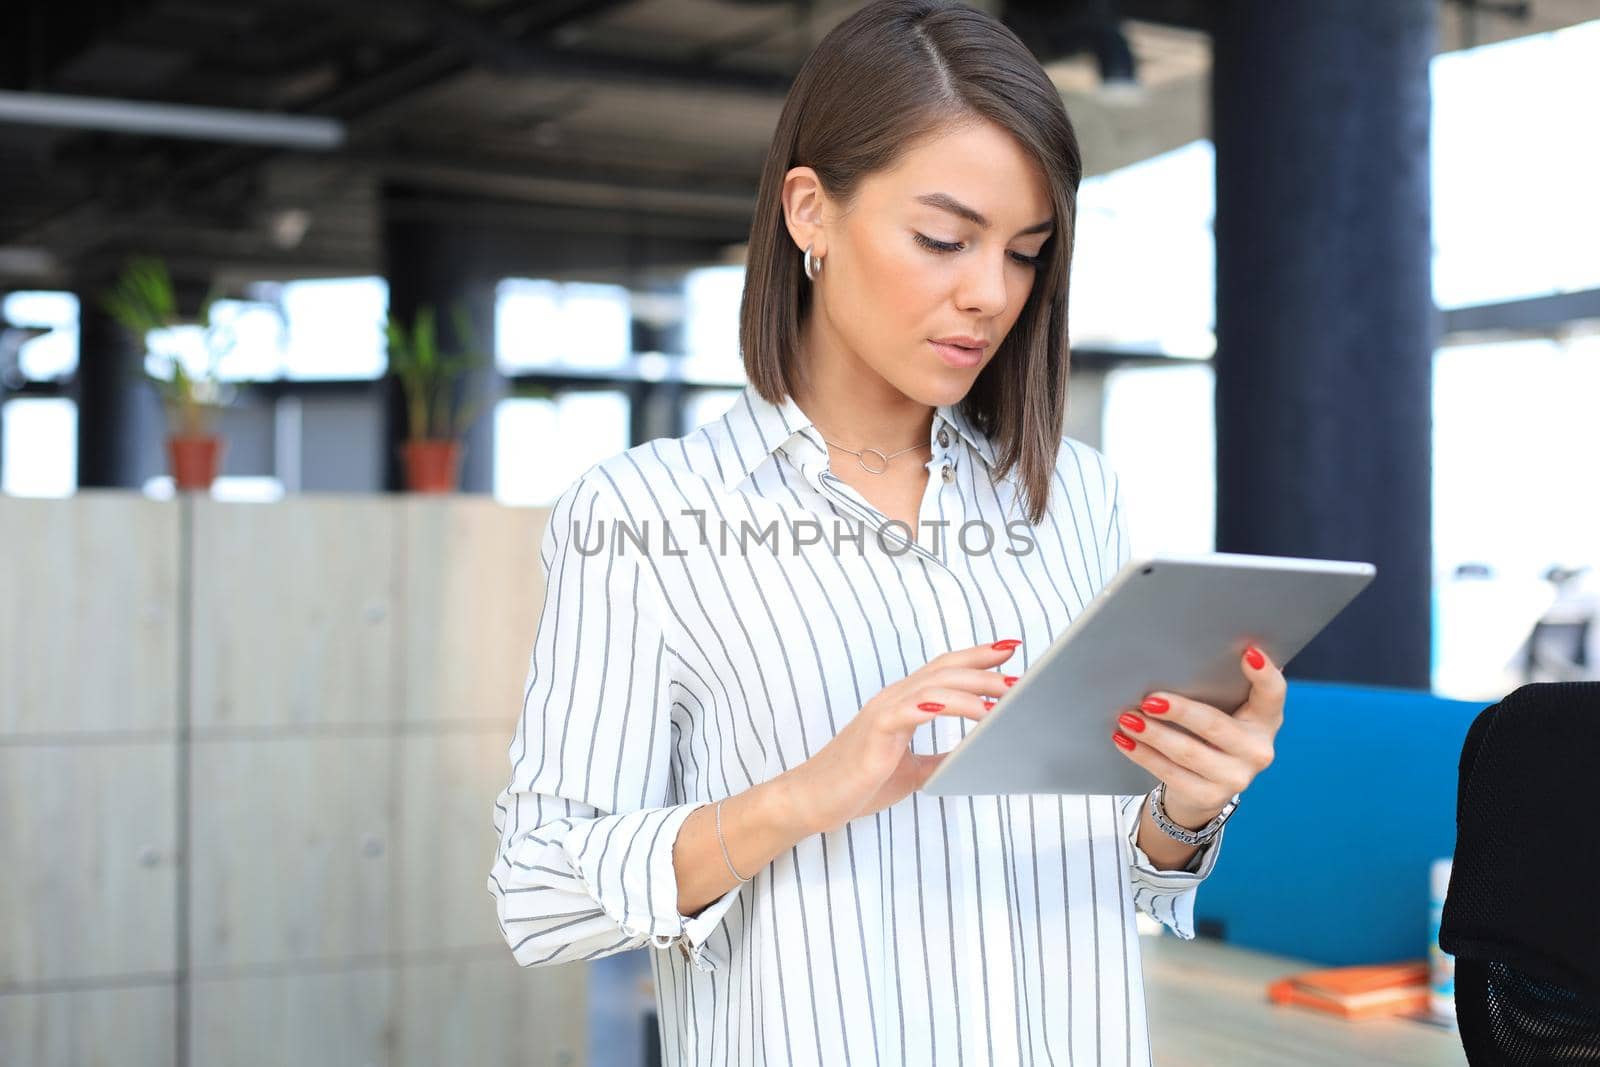 Portrait of young businesswoman looking at touch pad screen while standing in modern office space interior